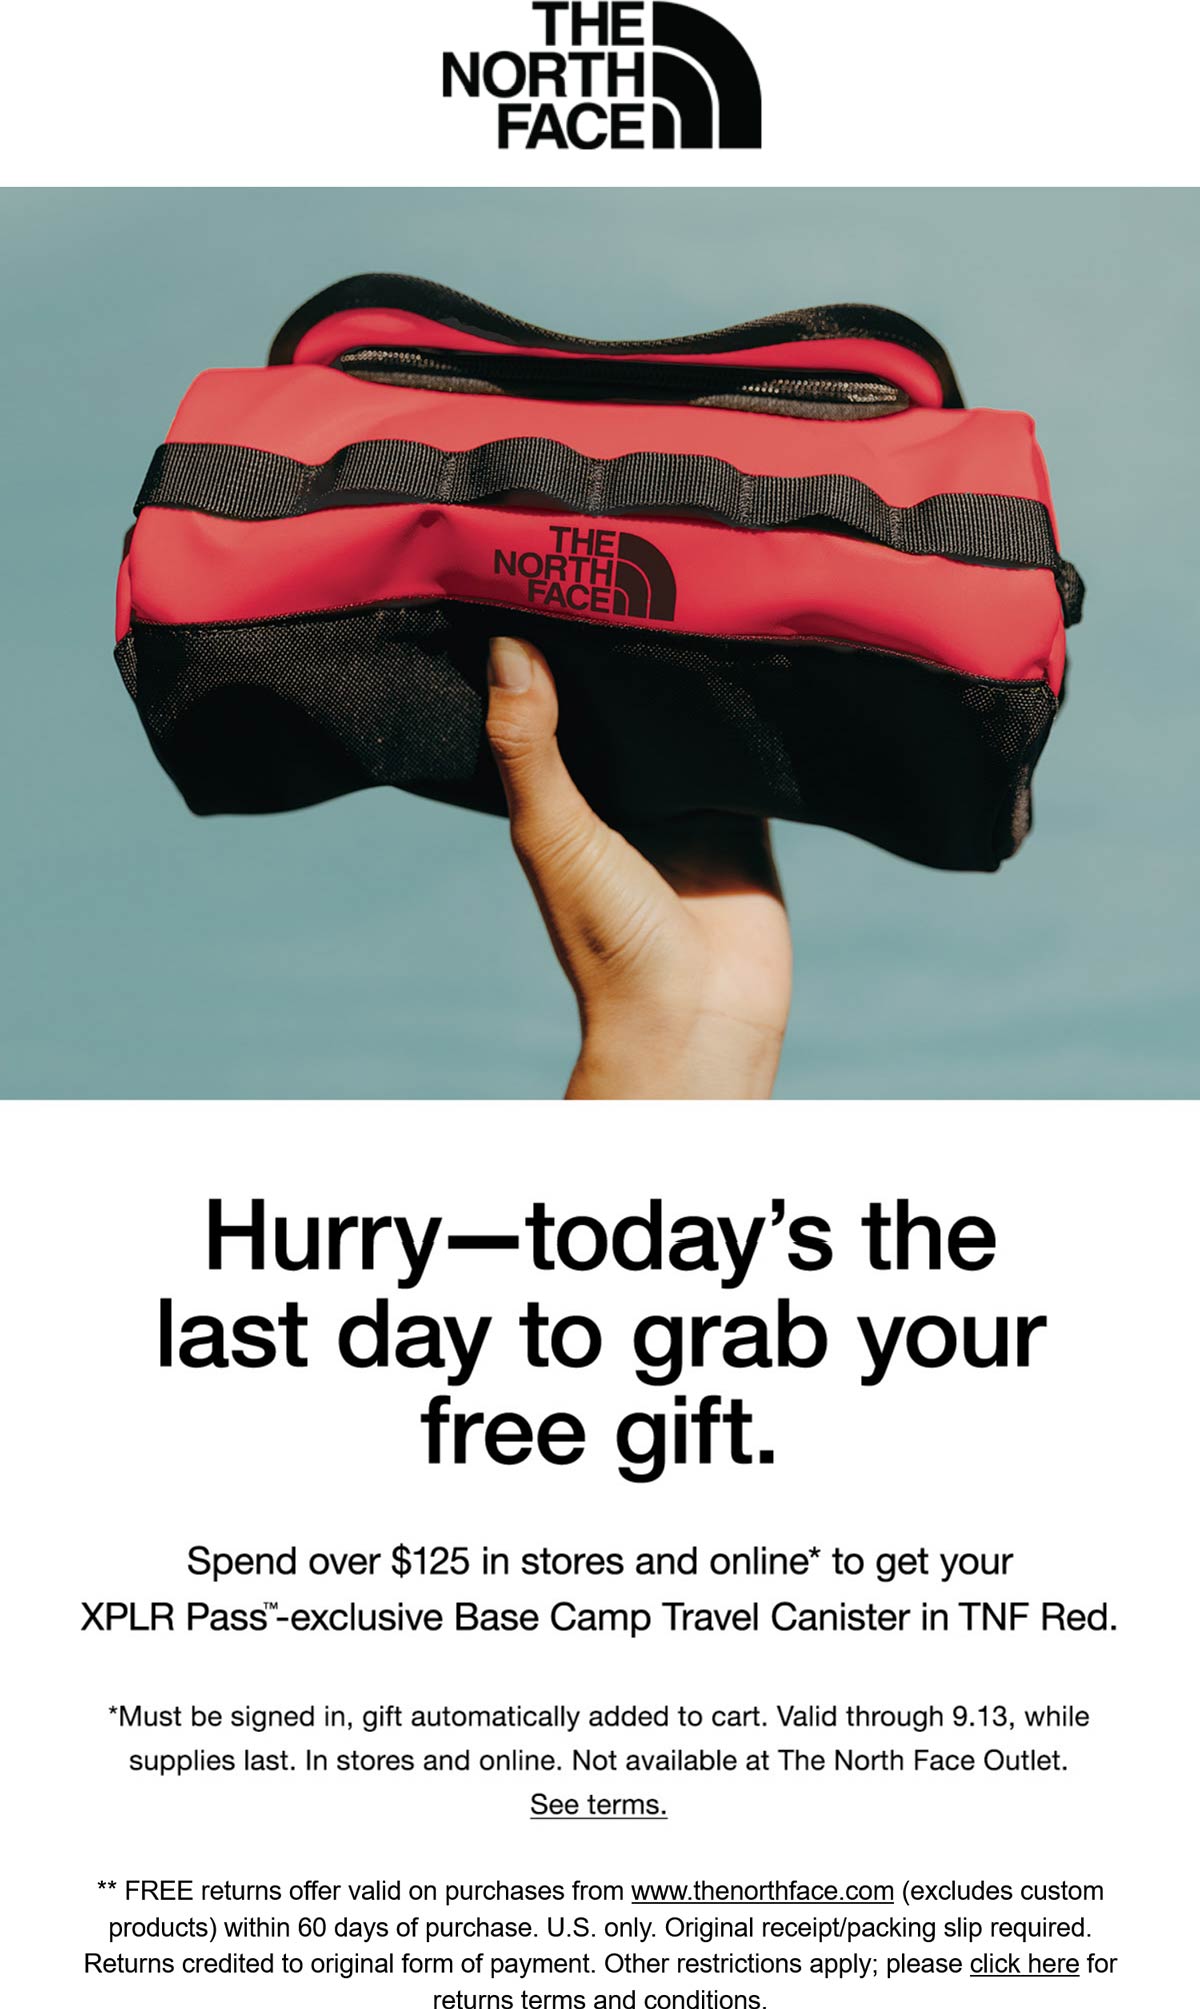 The North Face stores Coupon  Free base camp travel canister with $125 spent today at The North Face, ditto online #thenorthface 